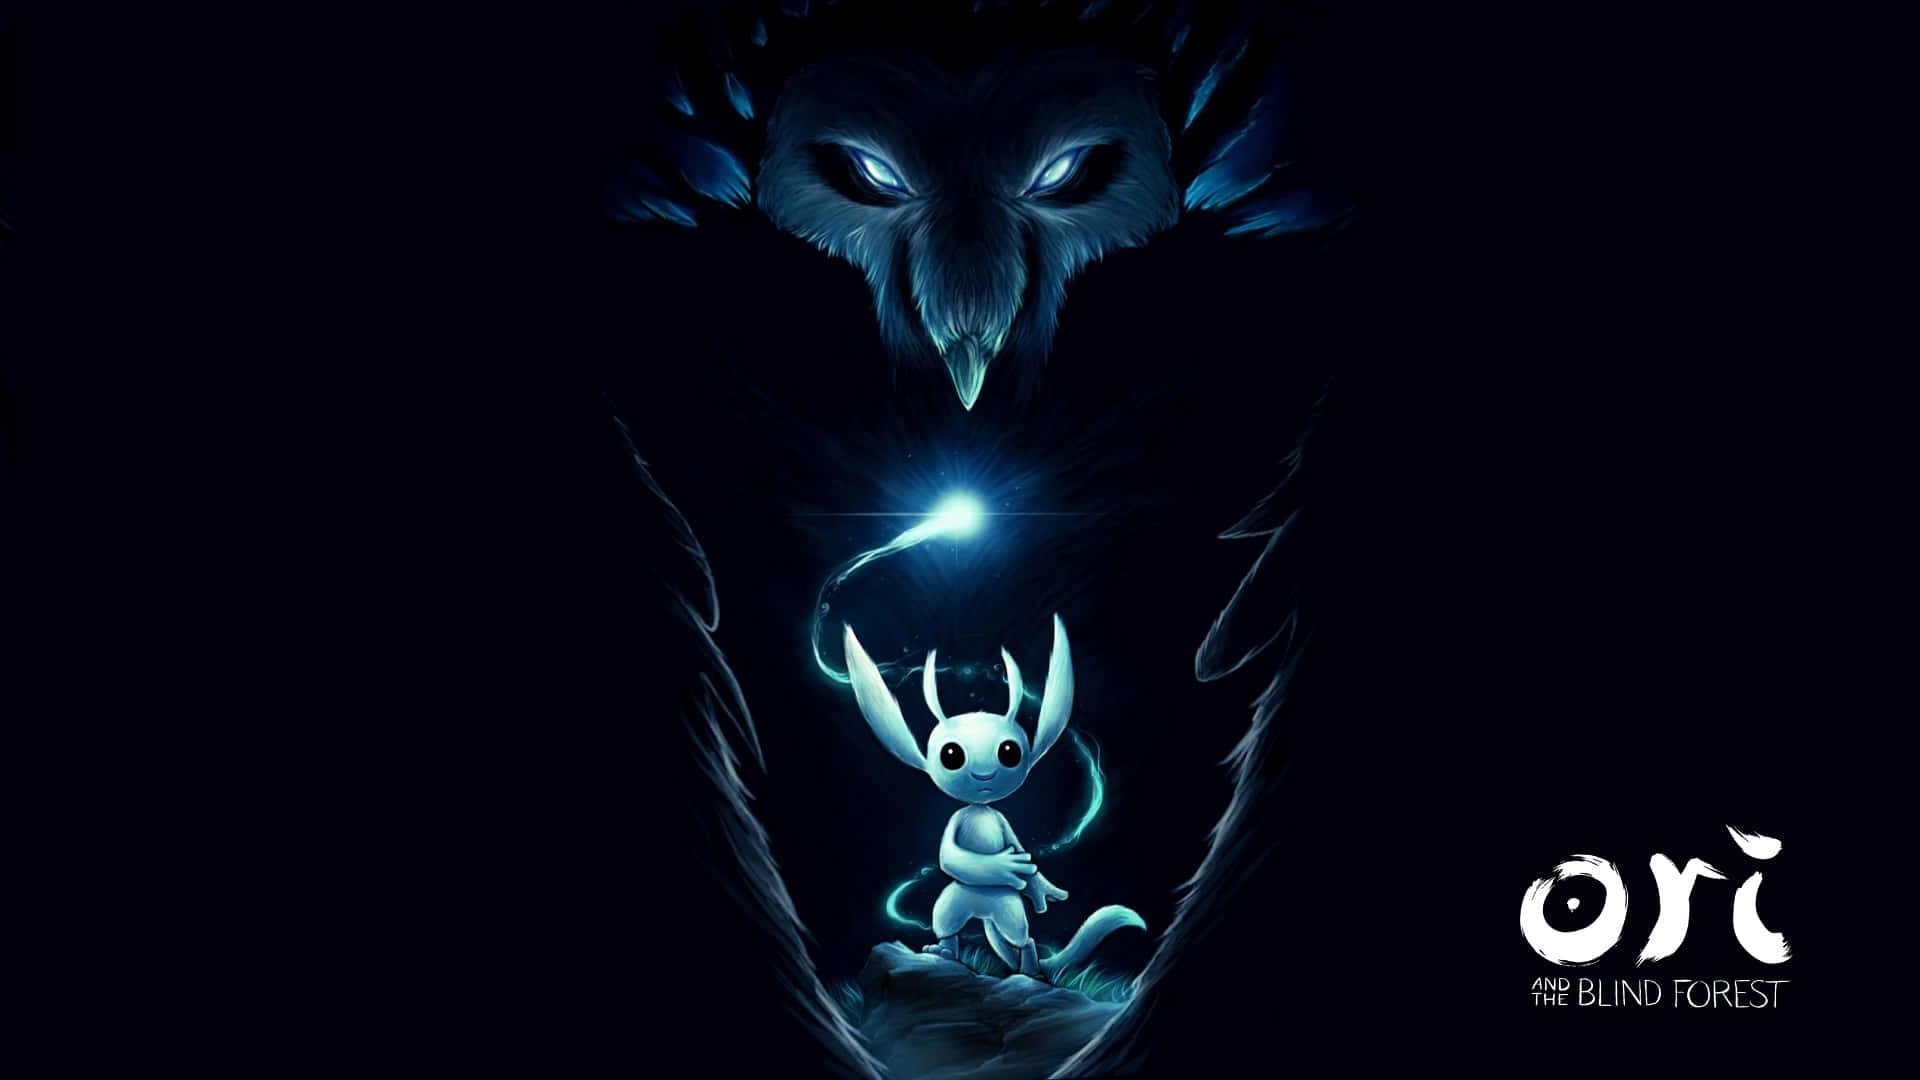 Kuro And Ori In The Blind Forest Wallpaper